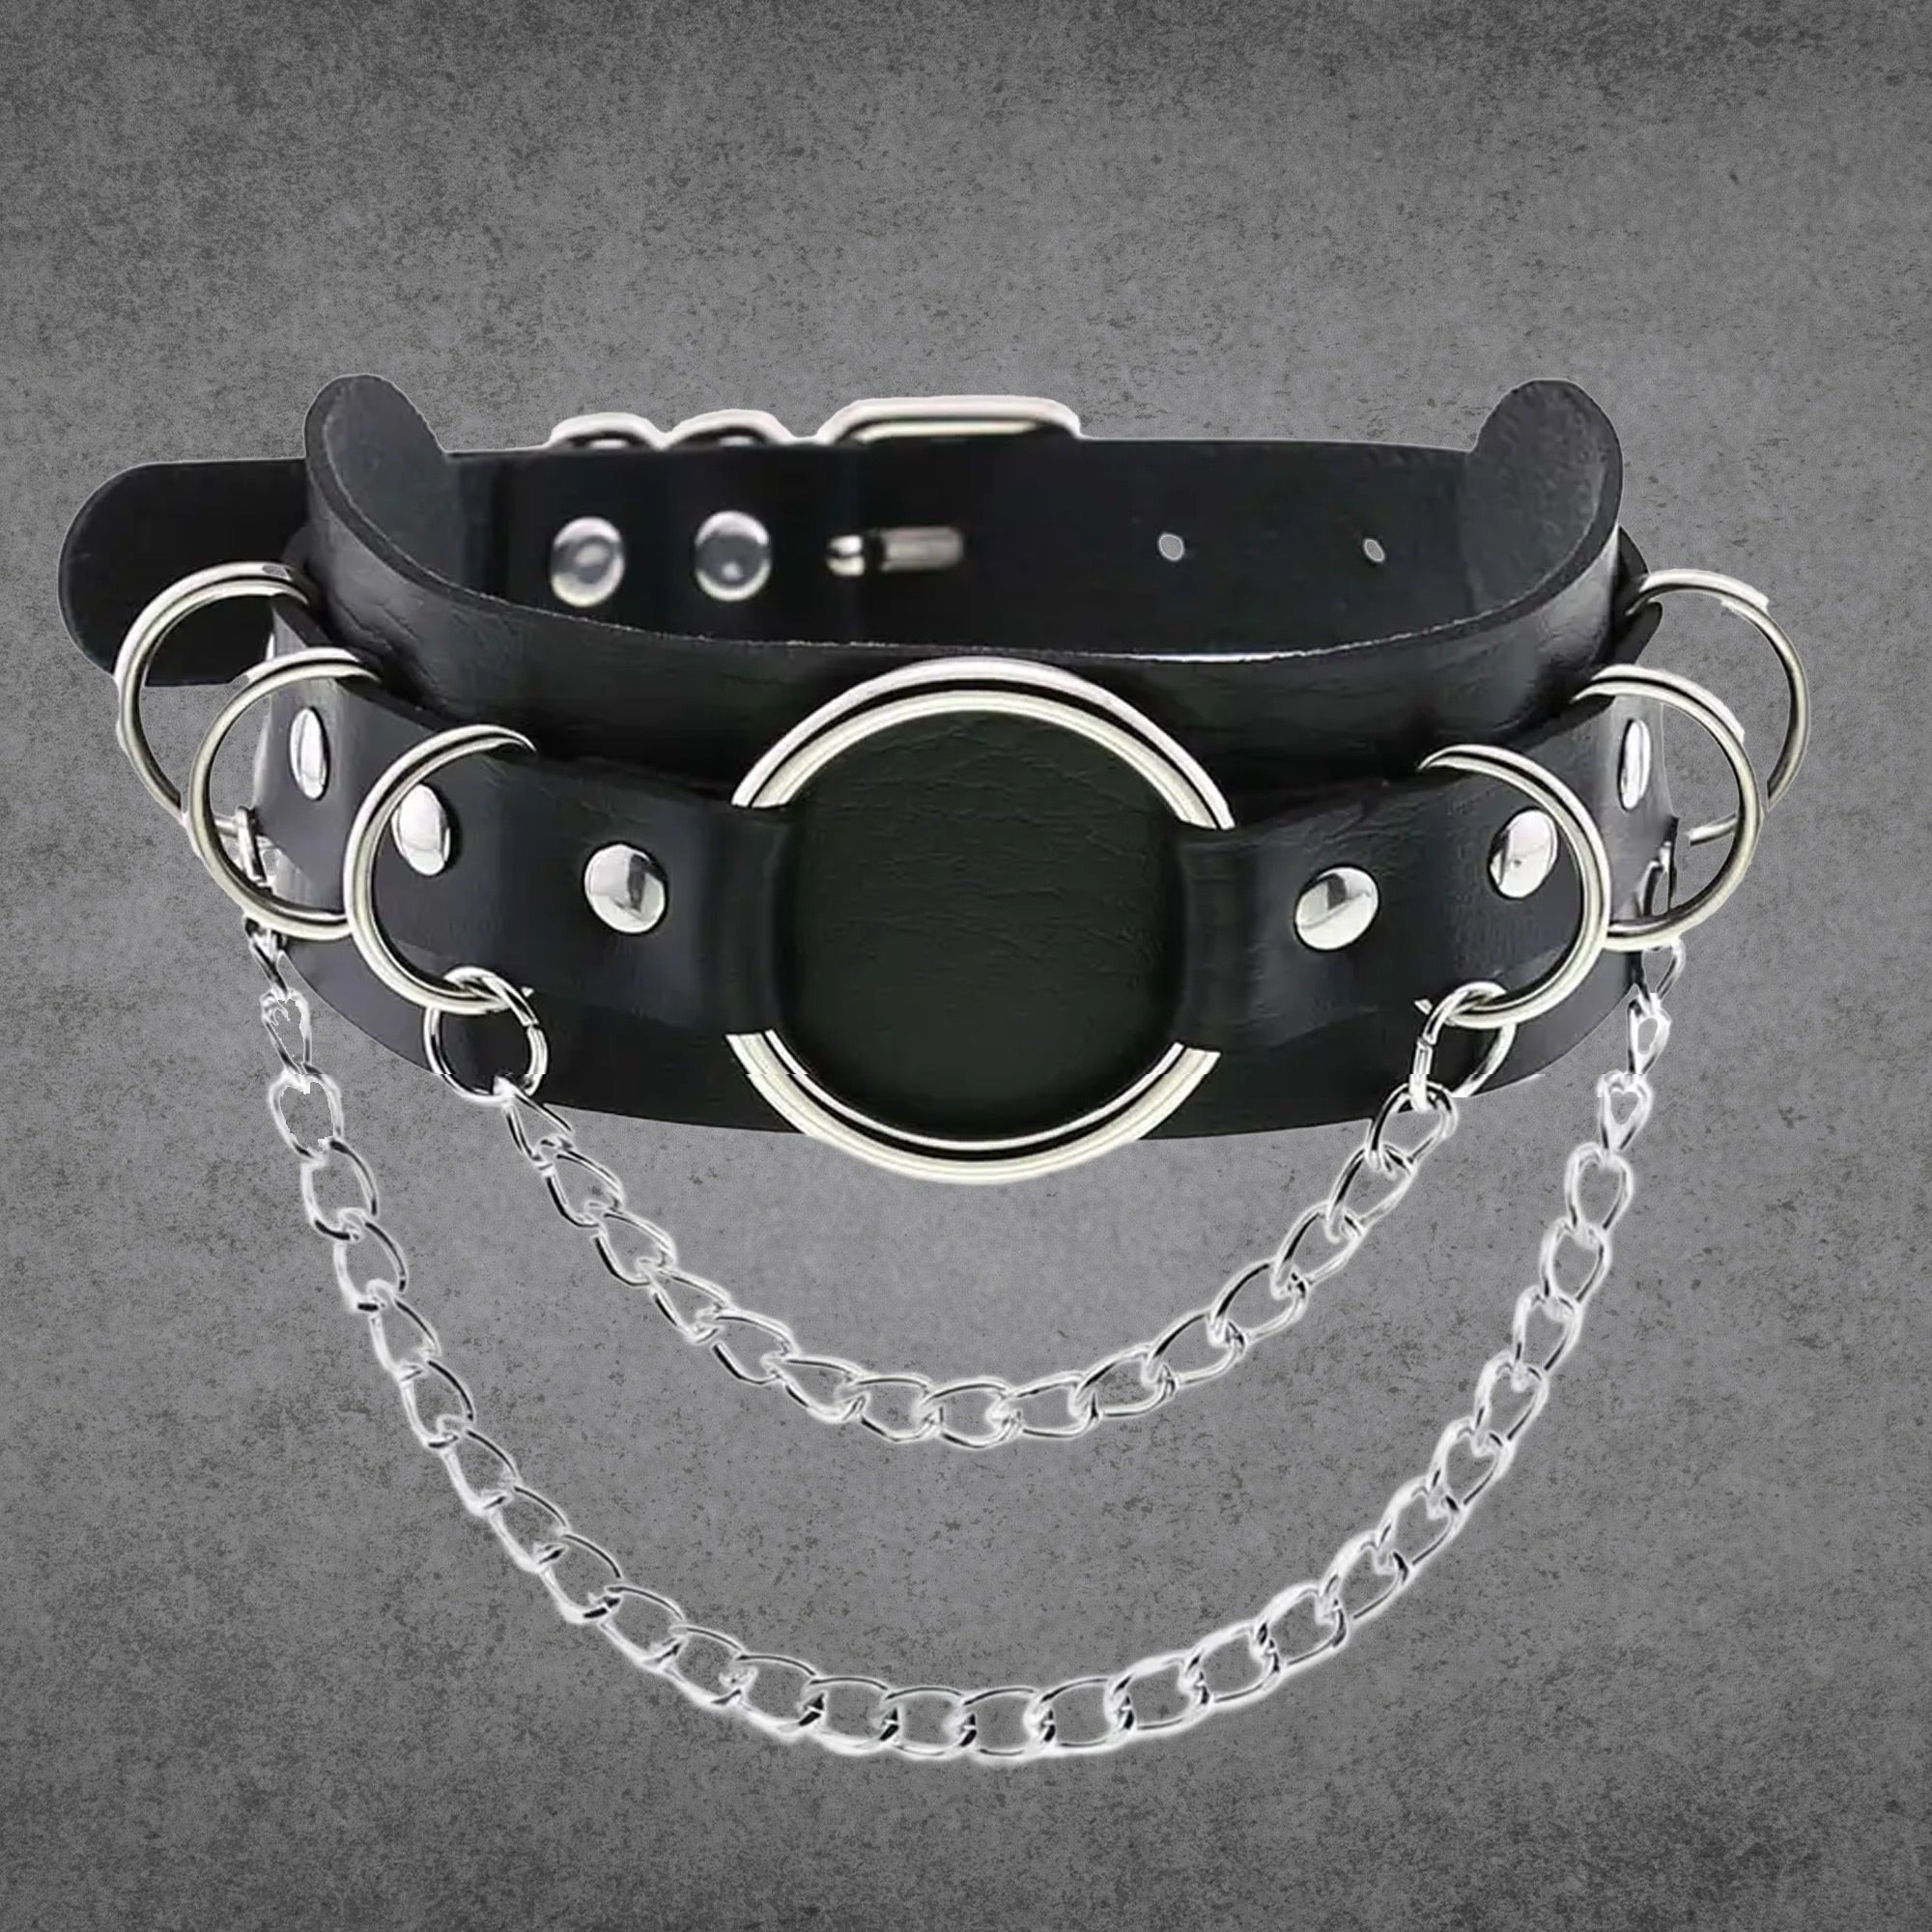 O Ring & Chains Collar